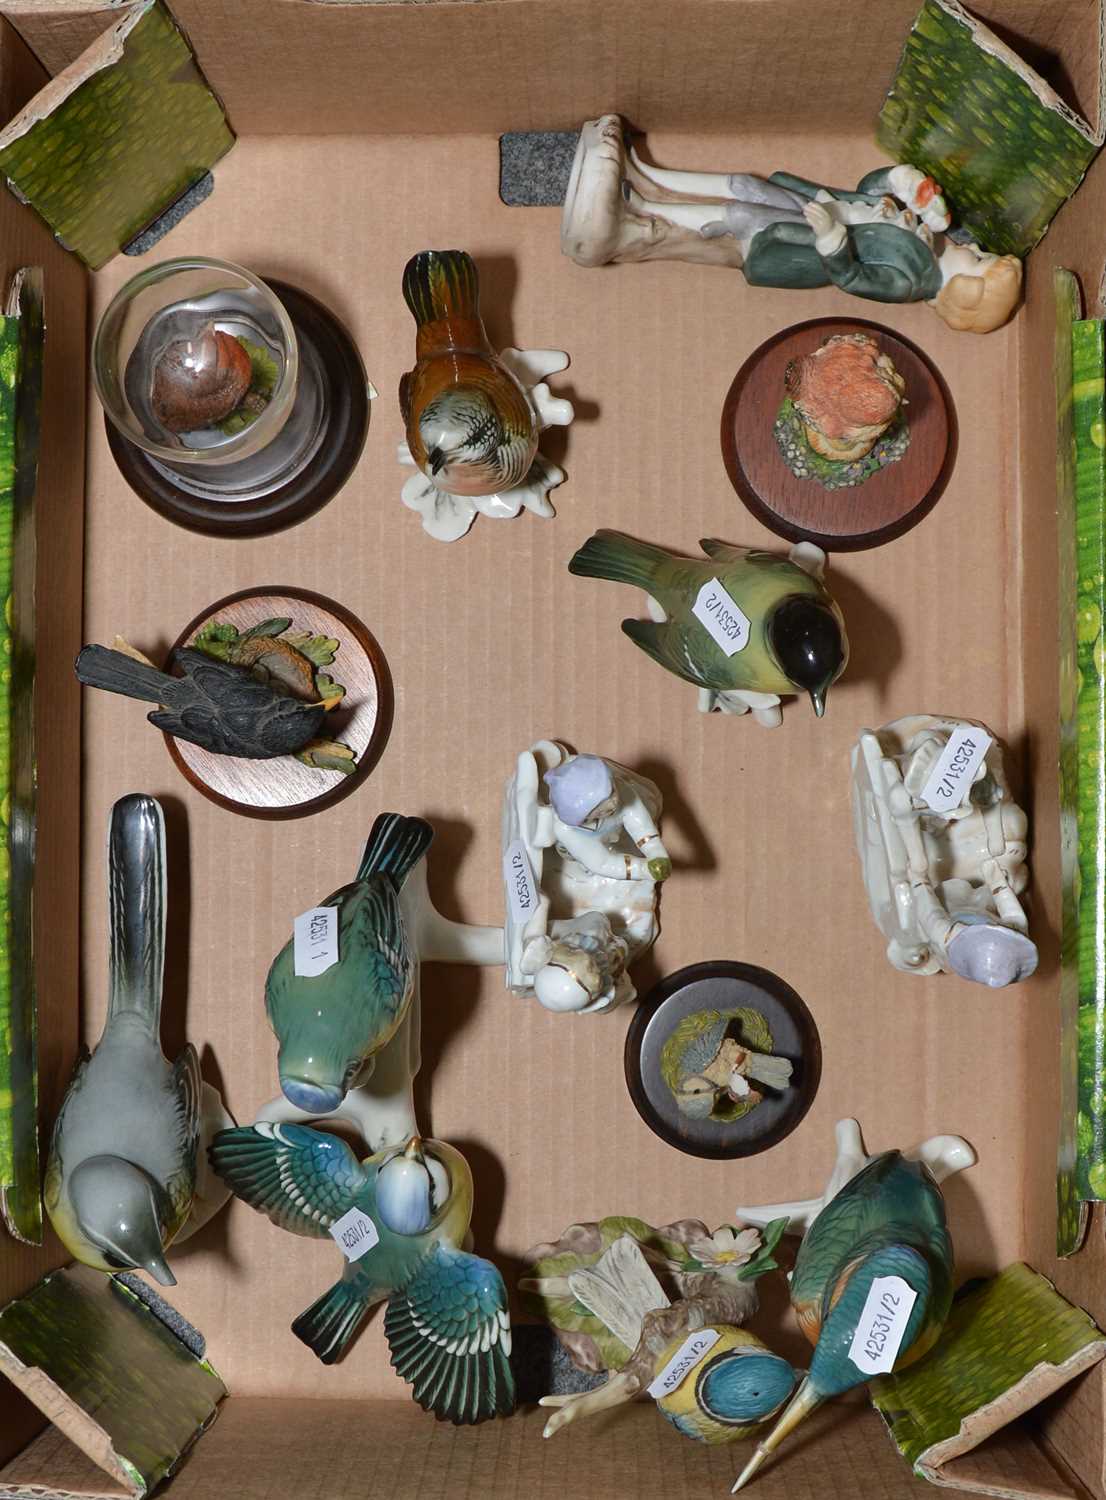 Lot 88 - Collection of ceramic bird figurines and others